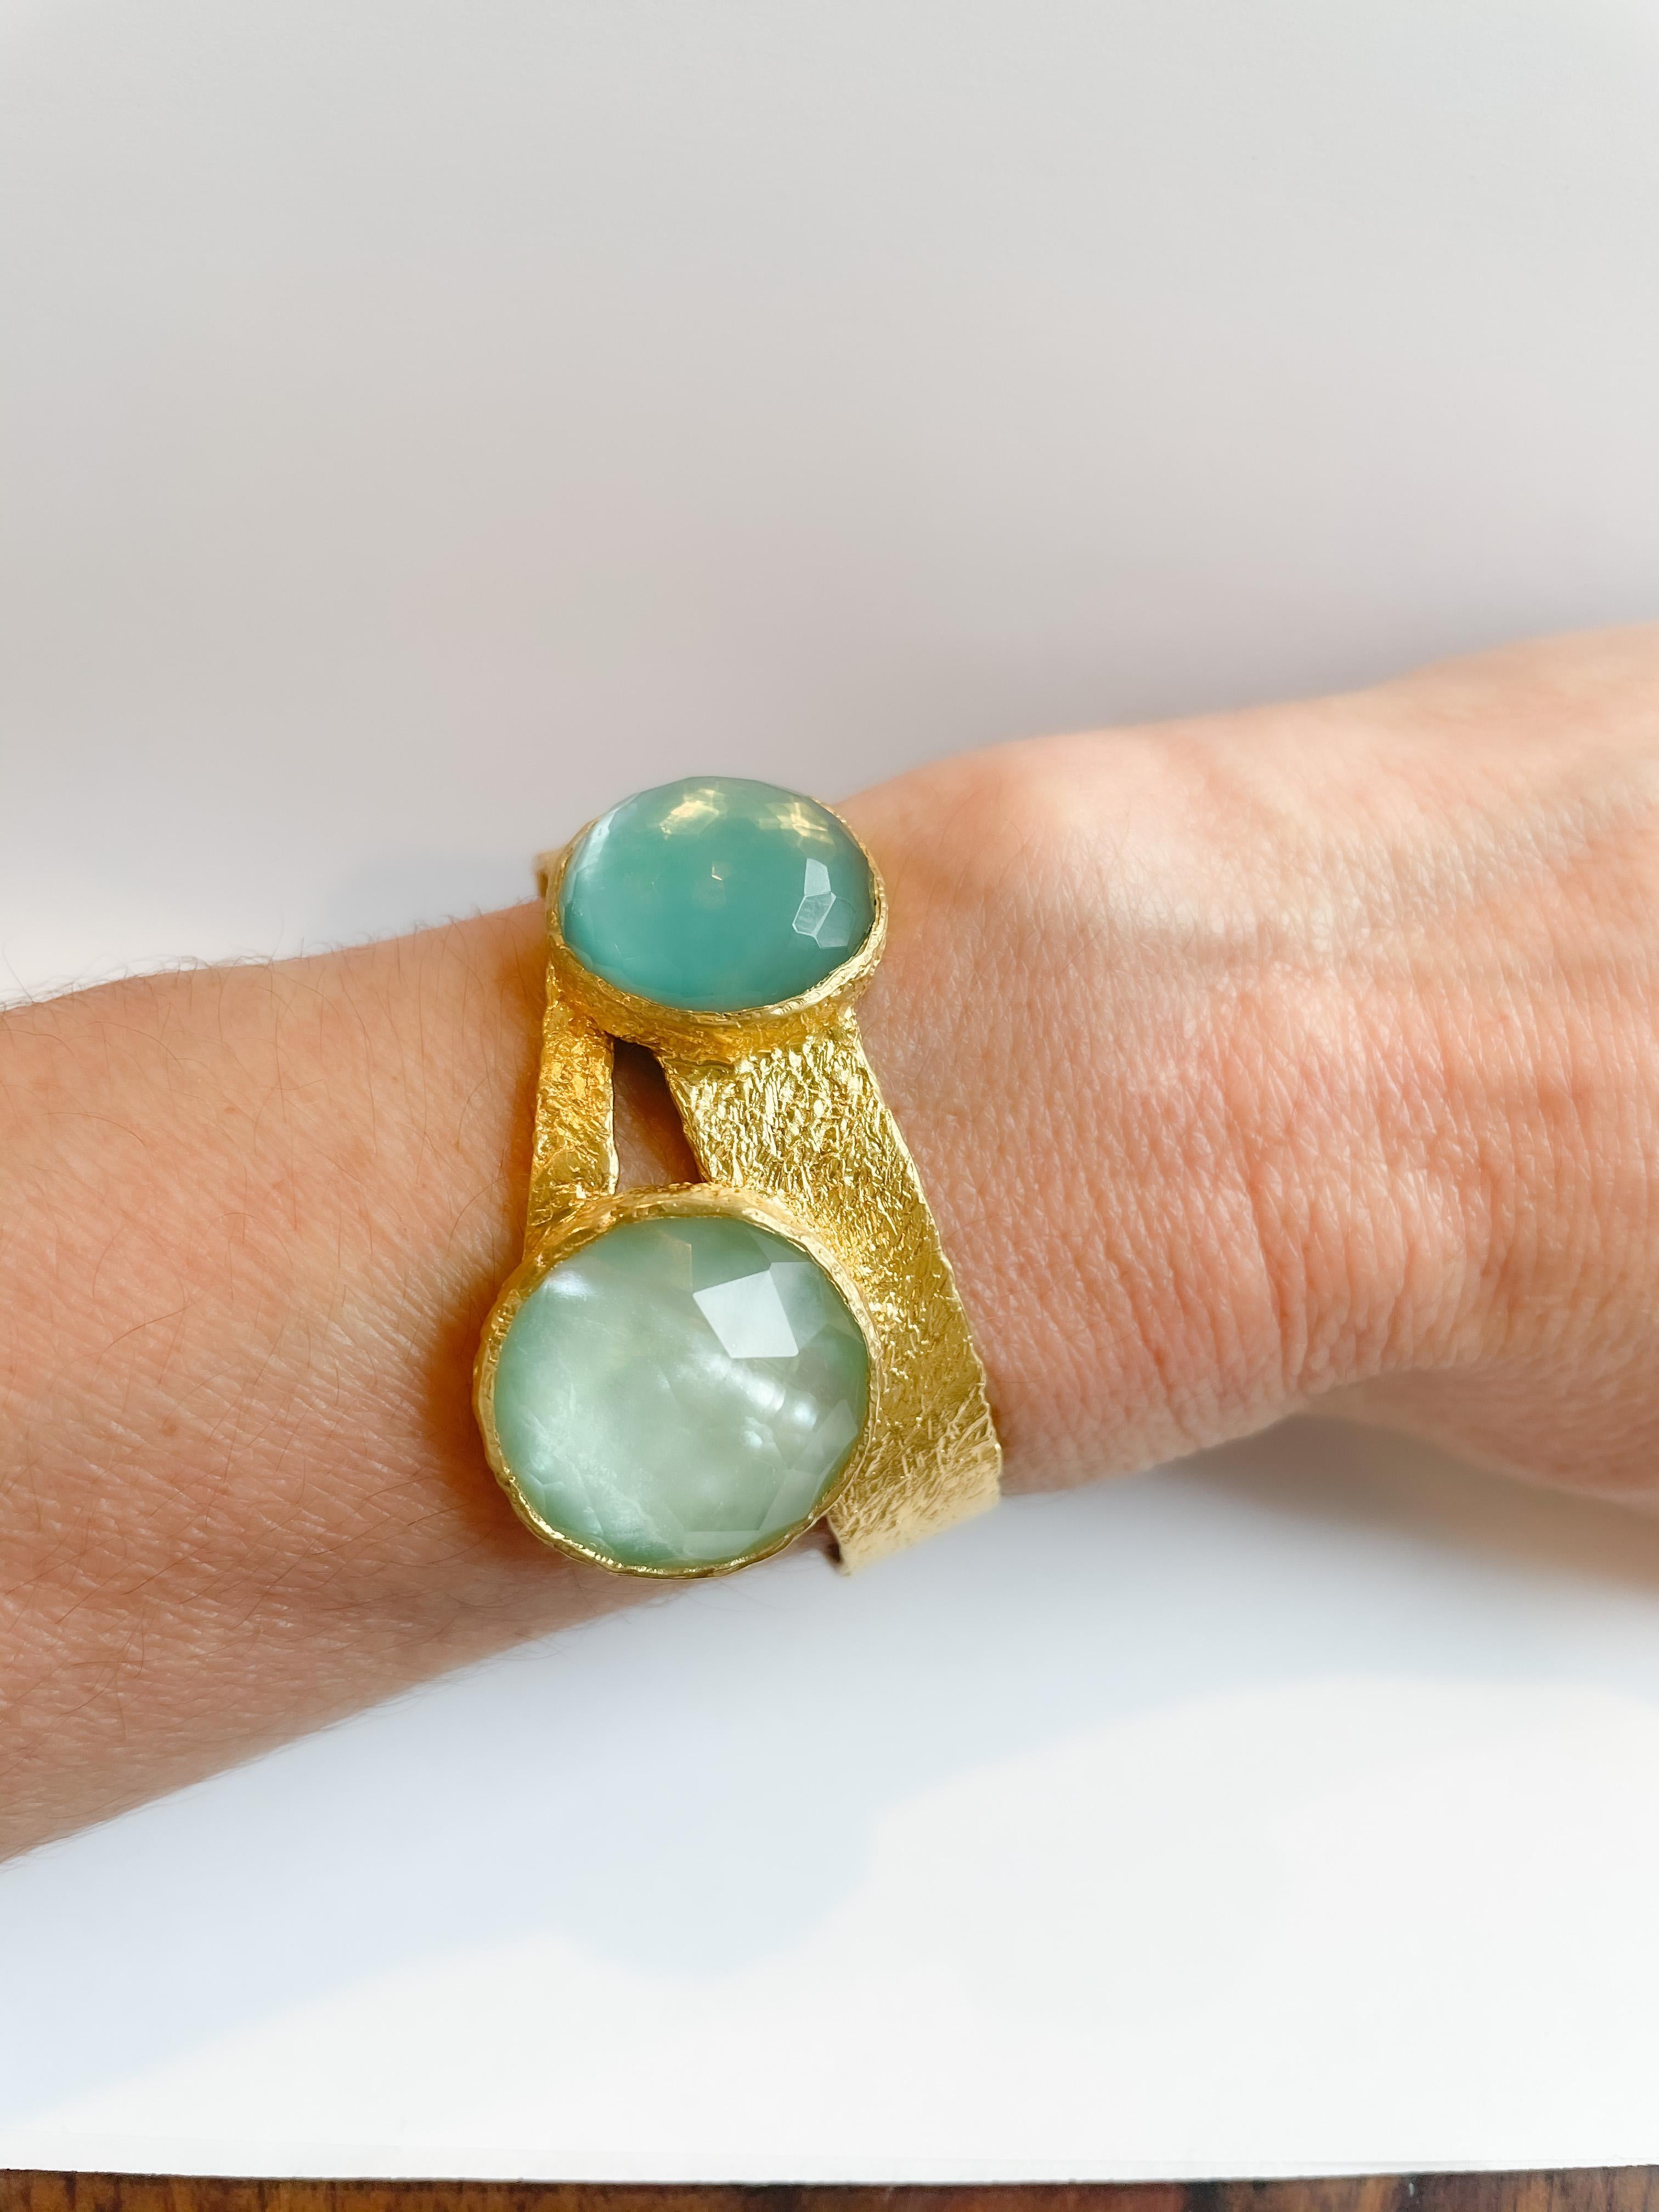 The Eclipse 22k gold cuff features 2 beautiful sliced stones both with Quartz on top and one with Turquoise and other with Mother of Pearl behind. The combinations of these stones together results in absolutely beautiful pop of color and a